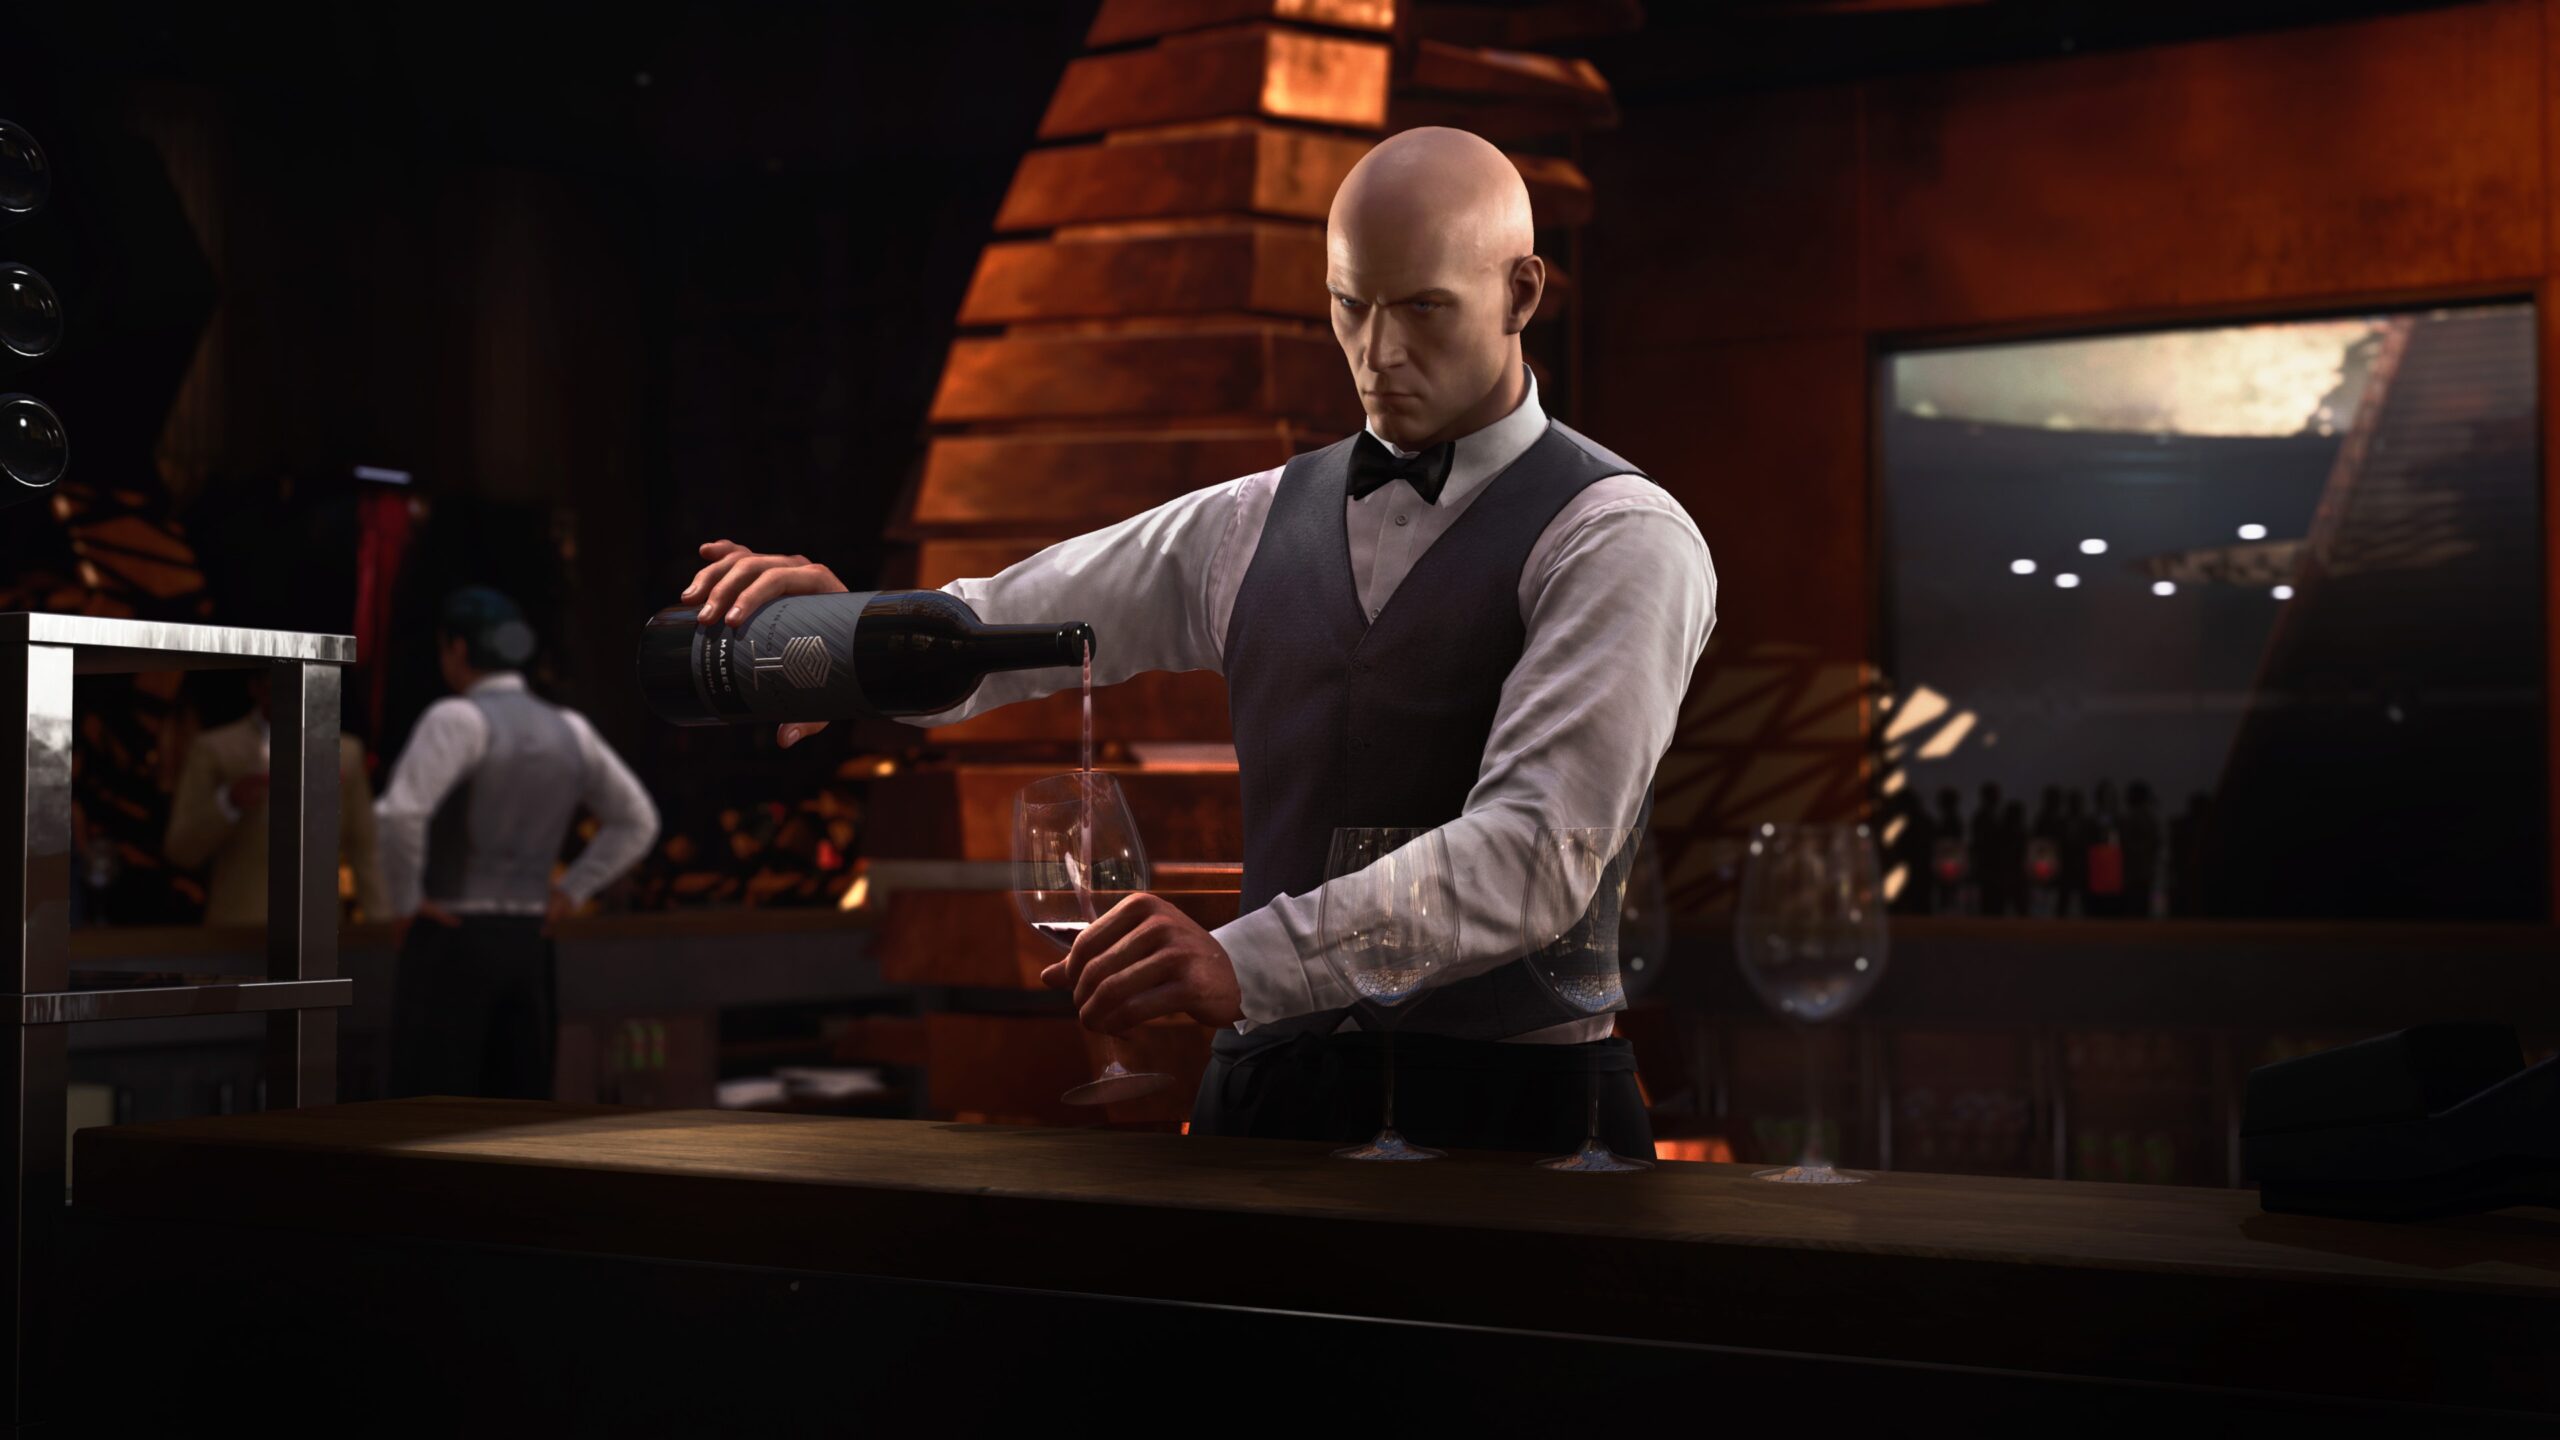 Hitman 3 Steam owners get free upgrades after IO 'fails to meet  expectations